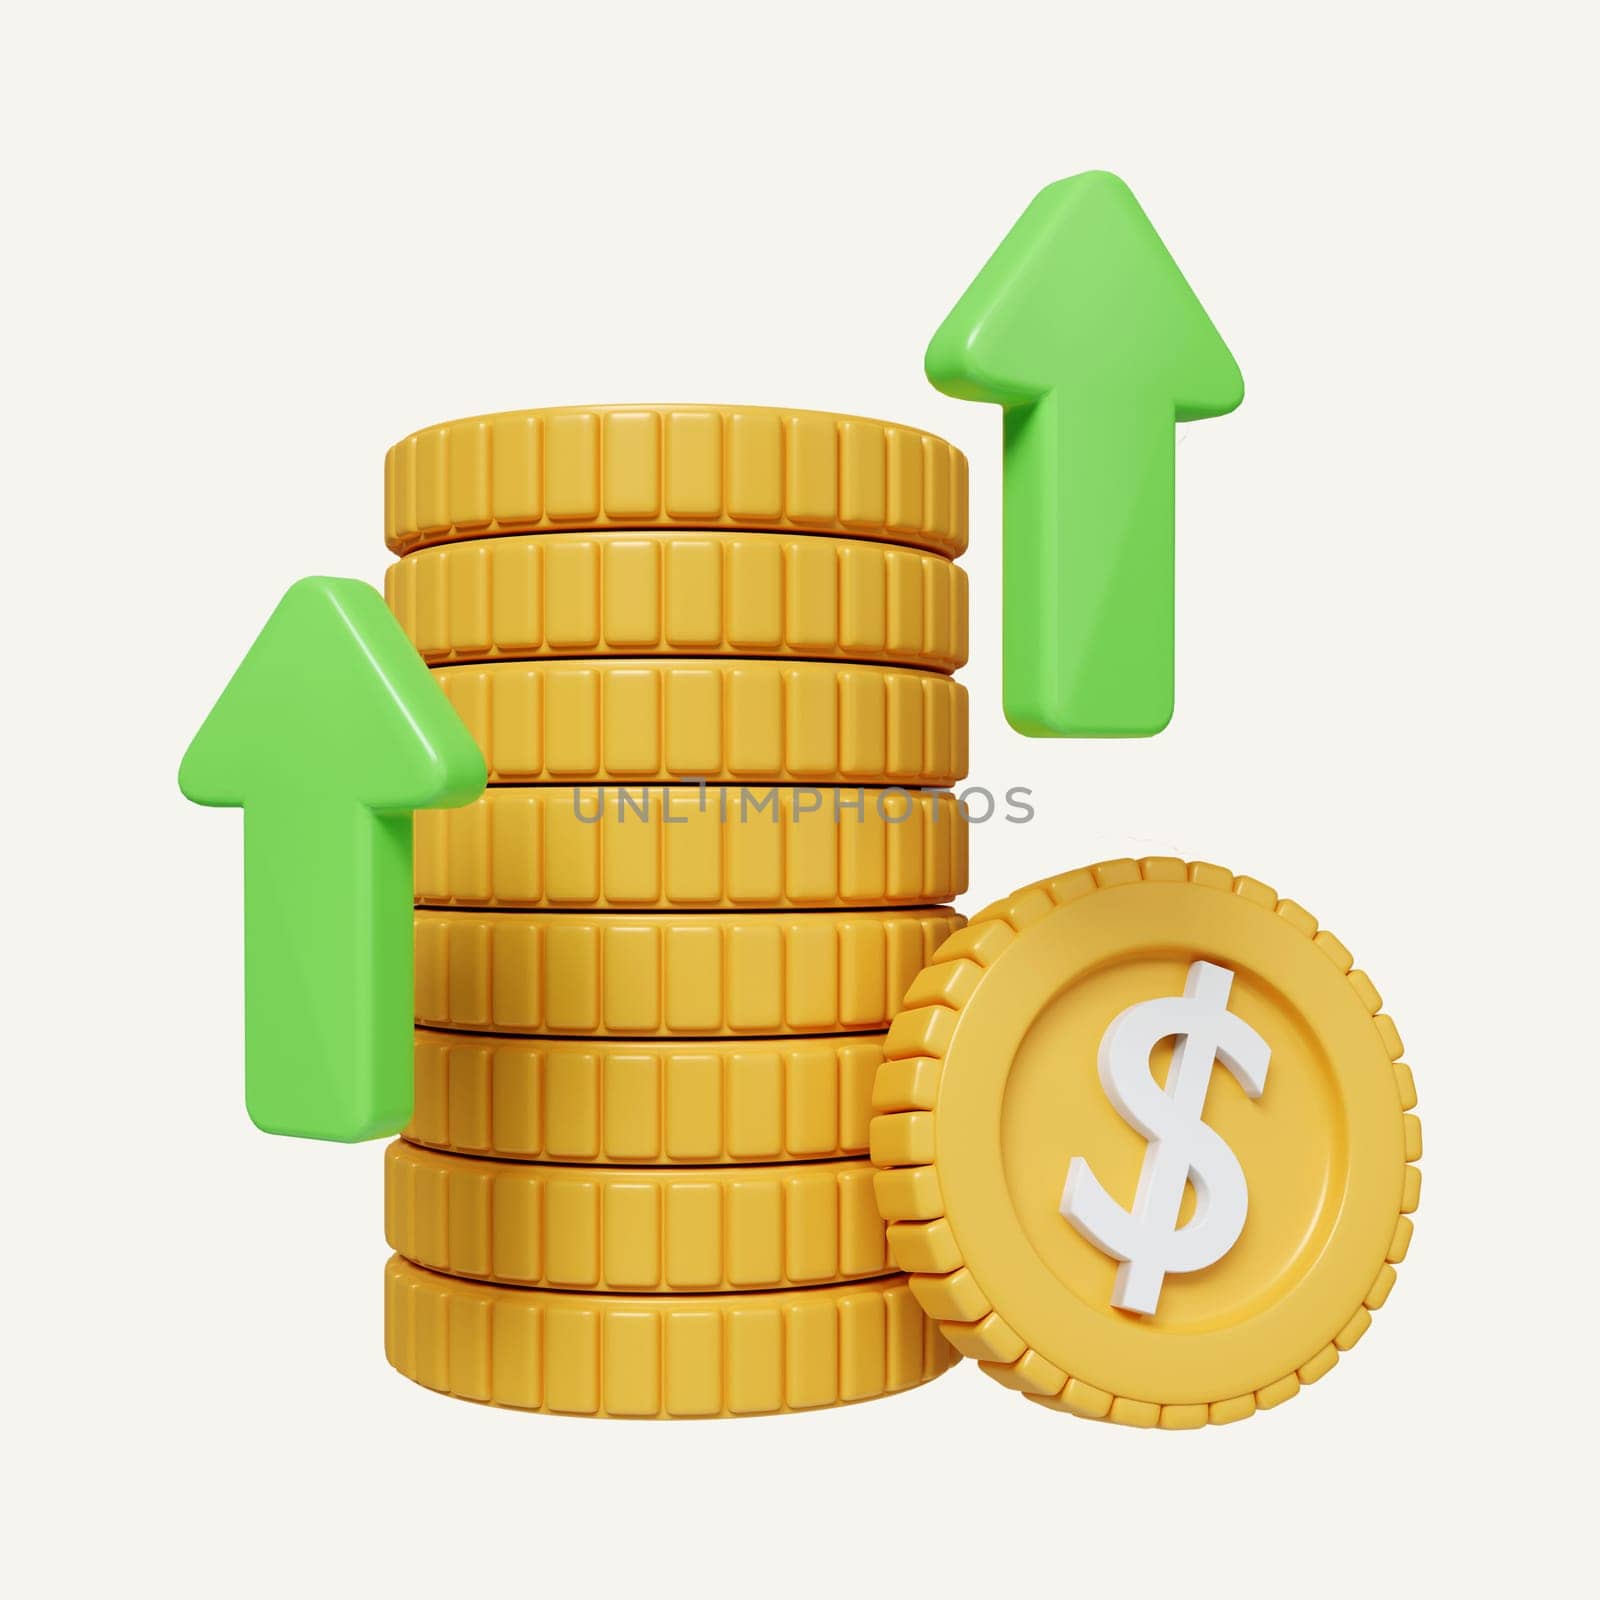 Green up arrow and coin stacks on white background. Financial success and growth concept. icon isolated on white background. 3d rendering illustration. Clipping path..